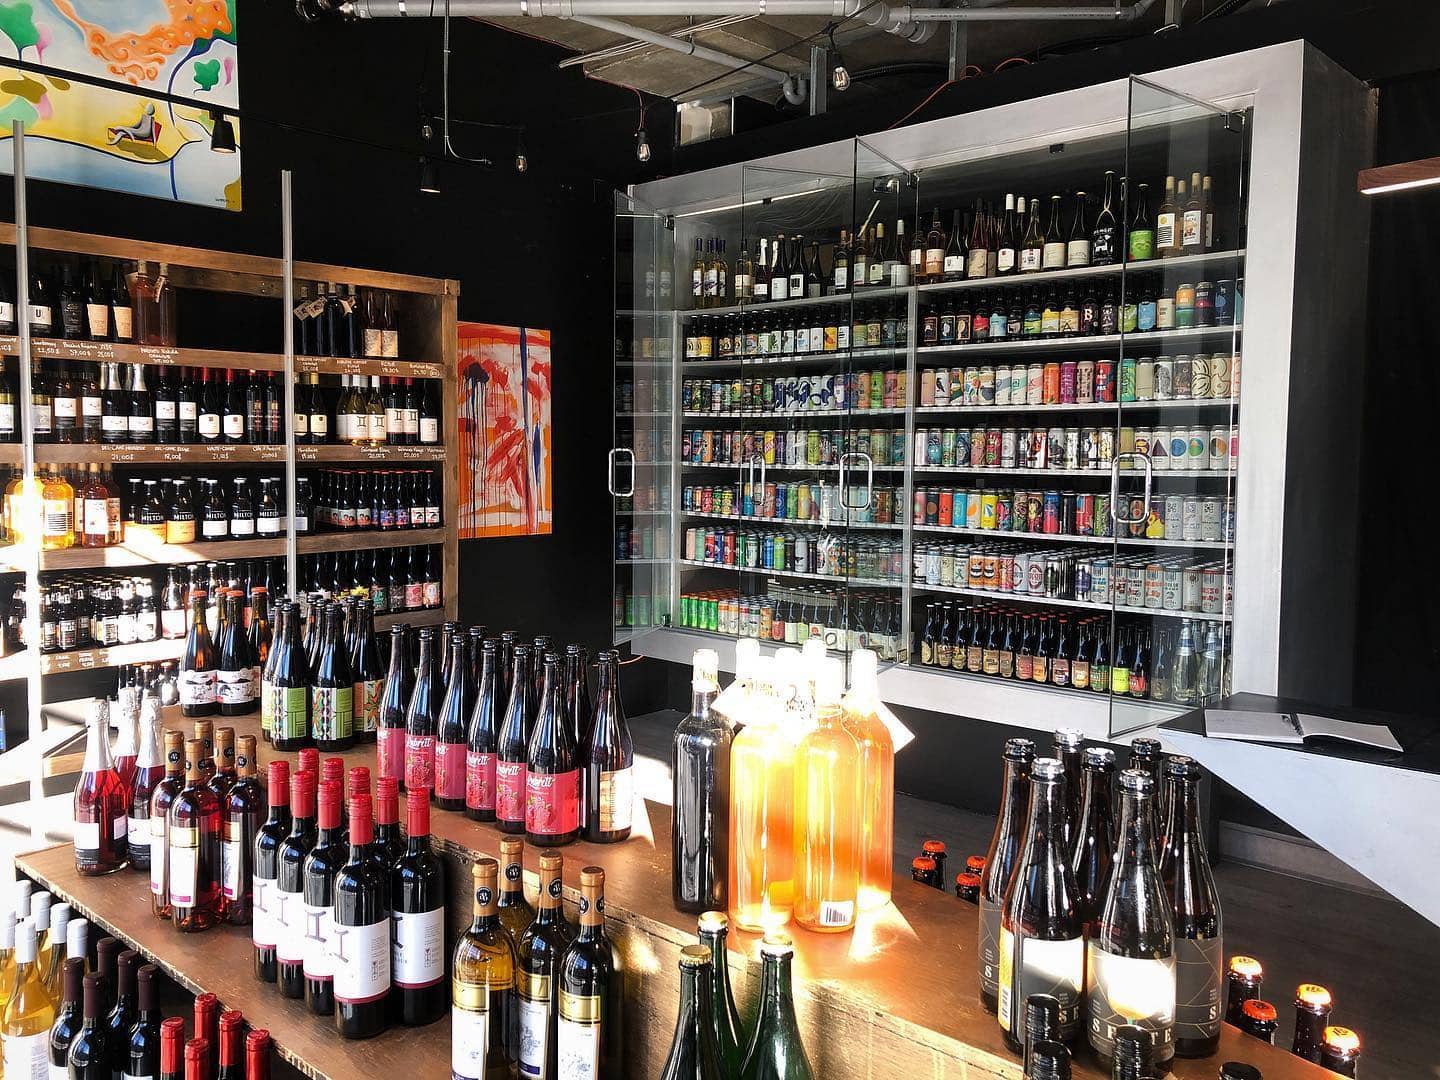 Where to find Quebec beers, wines, and cider in Montreal